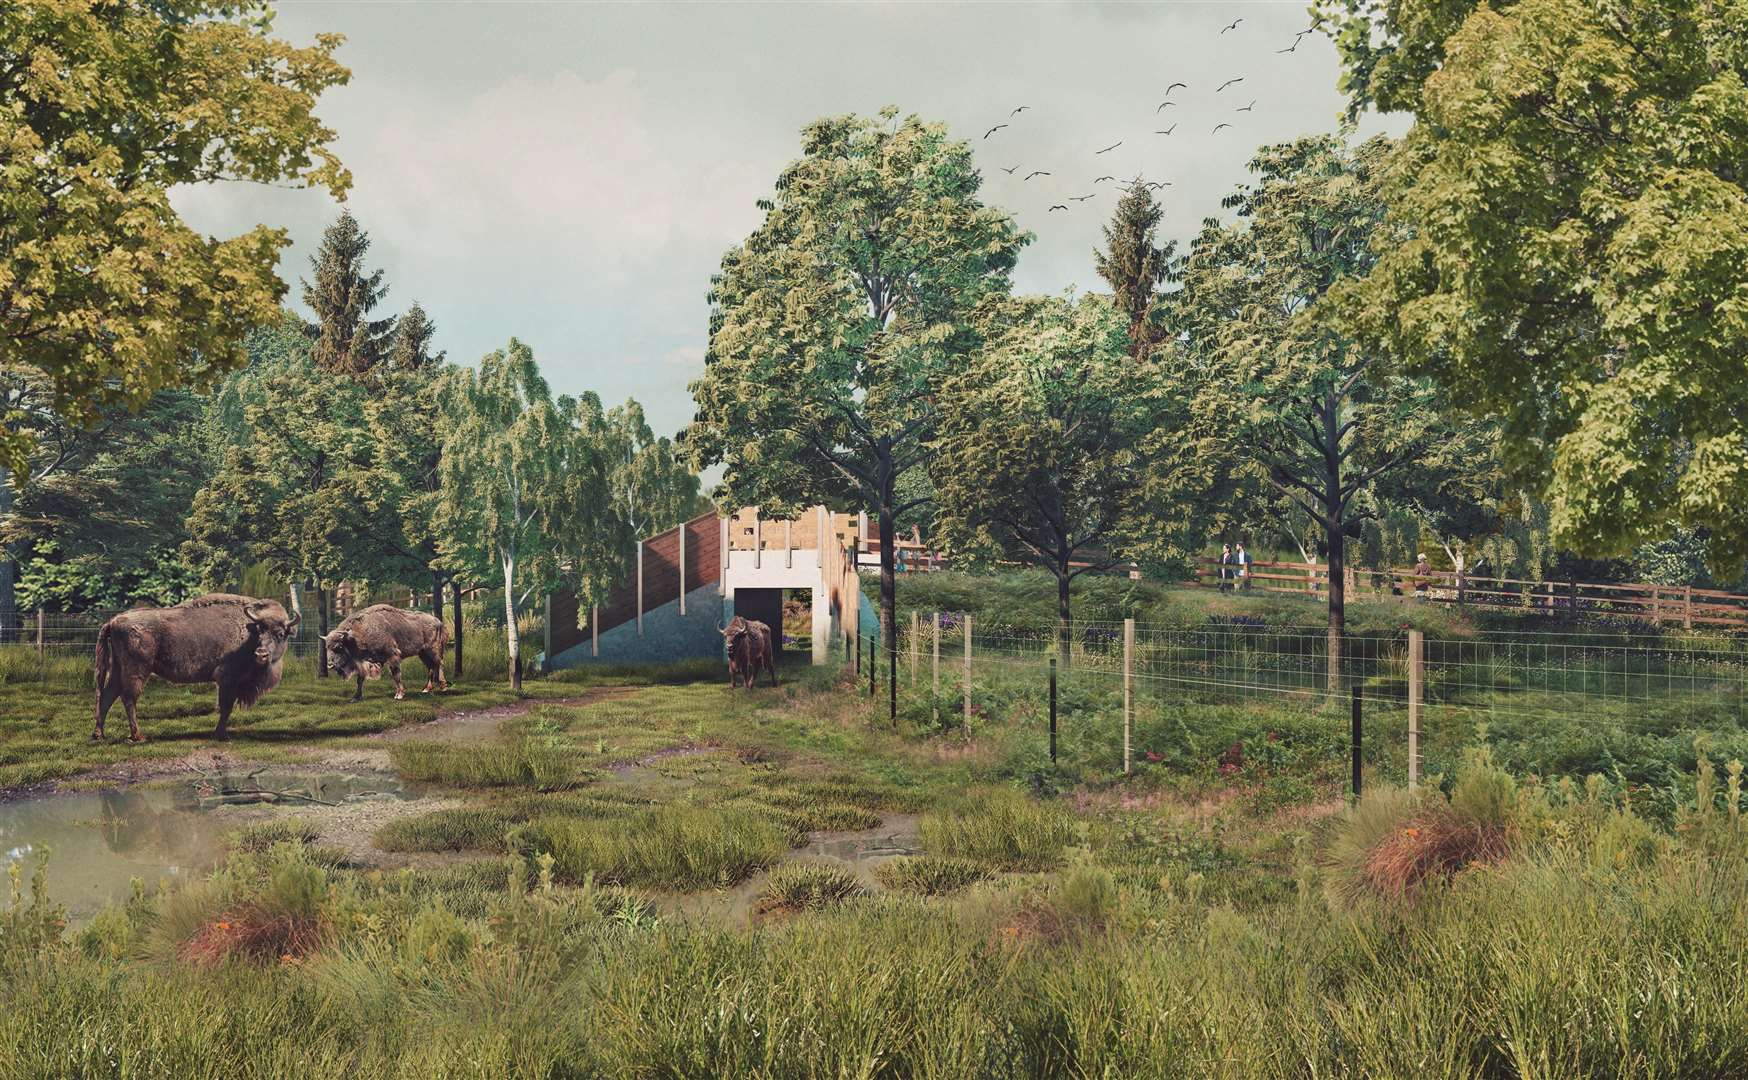 The proposed bison bridges are set to cost £250,000 to build and will allow the bison to explore a wider grazing area. Picture: Russell Perry Visual Studio